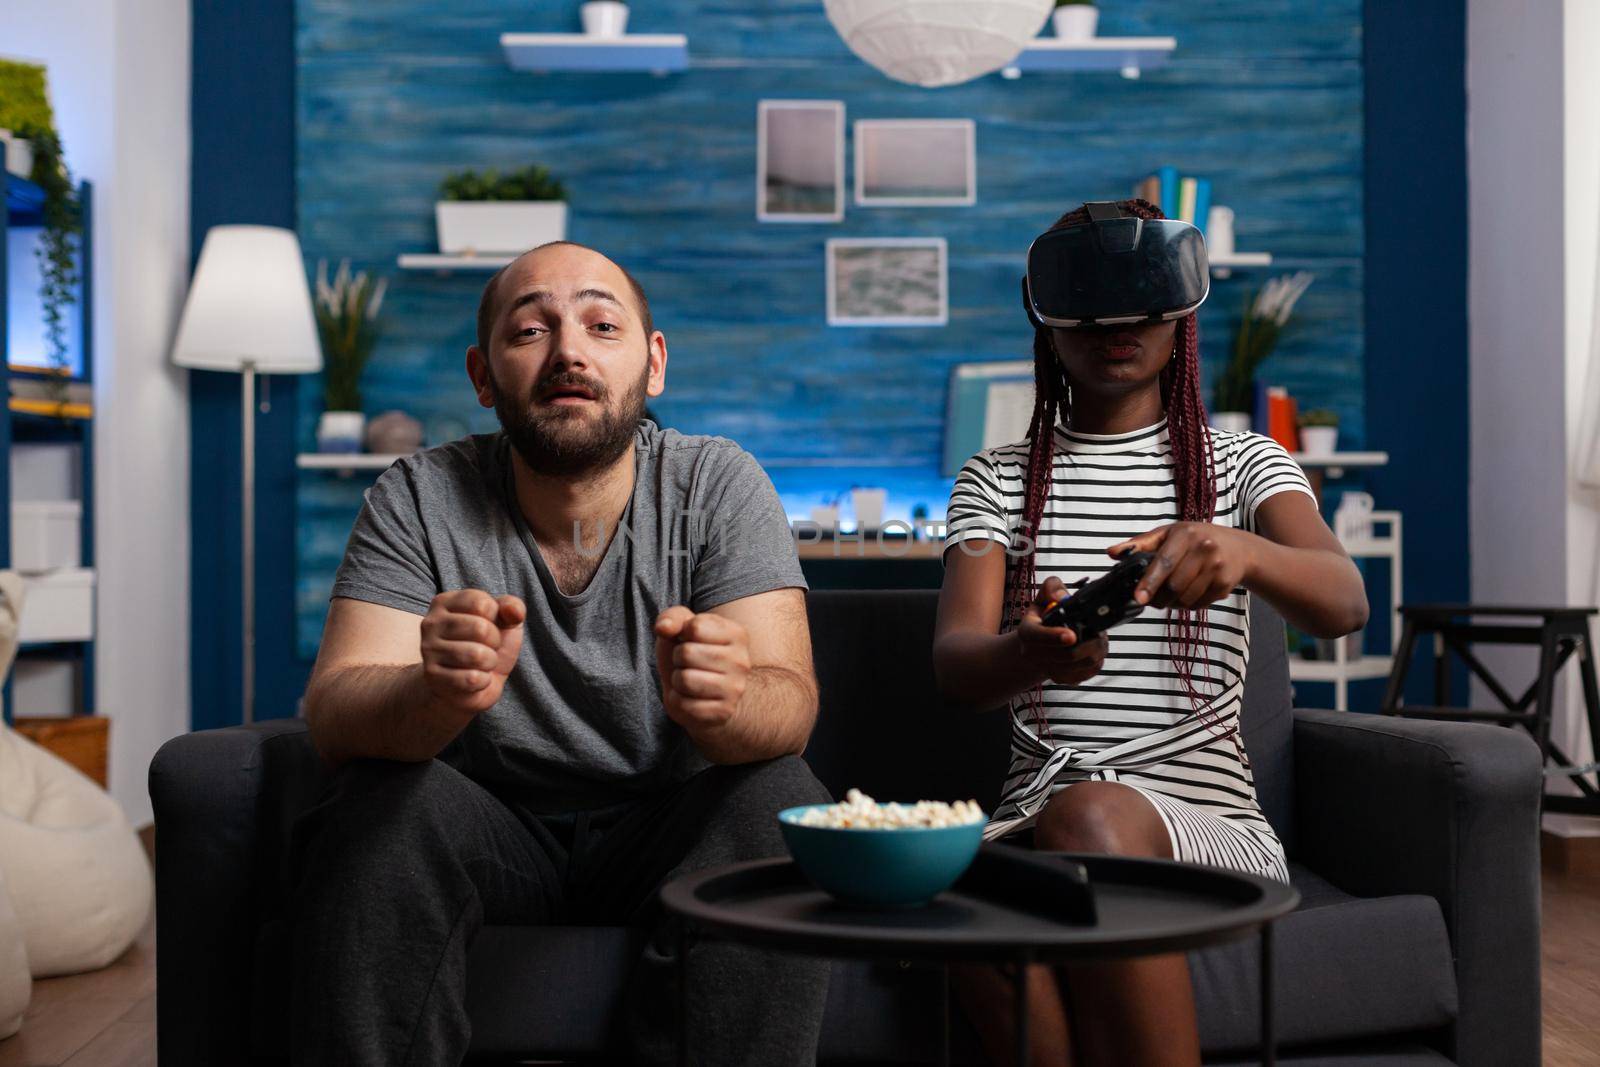 Interracial couple using vr glasses and controllers for fun at home. Mixed race young people with technology playing video game with goggles, headset and console on television.